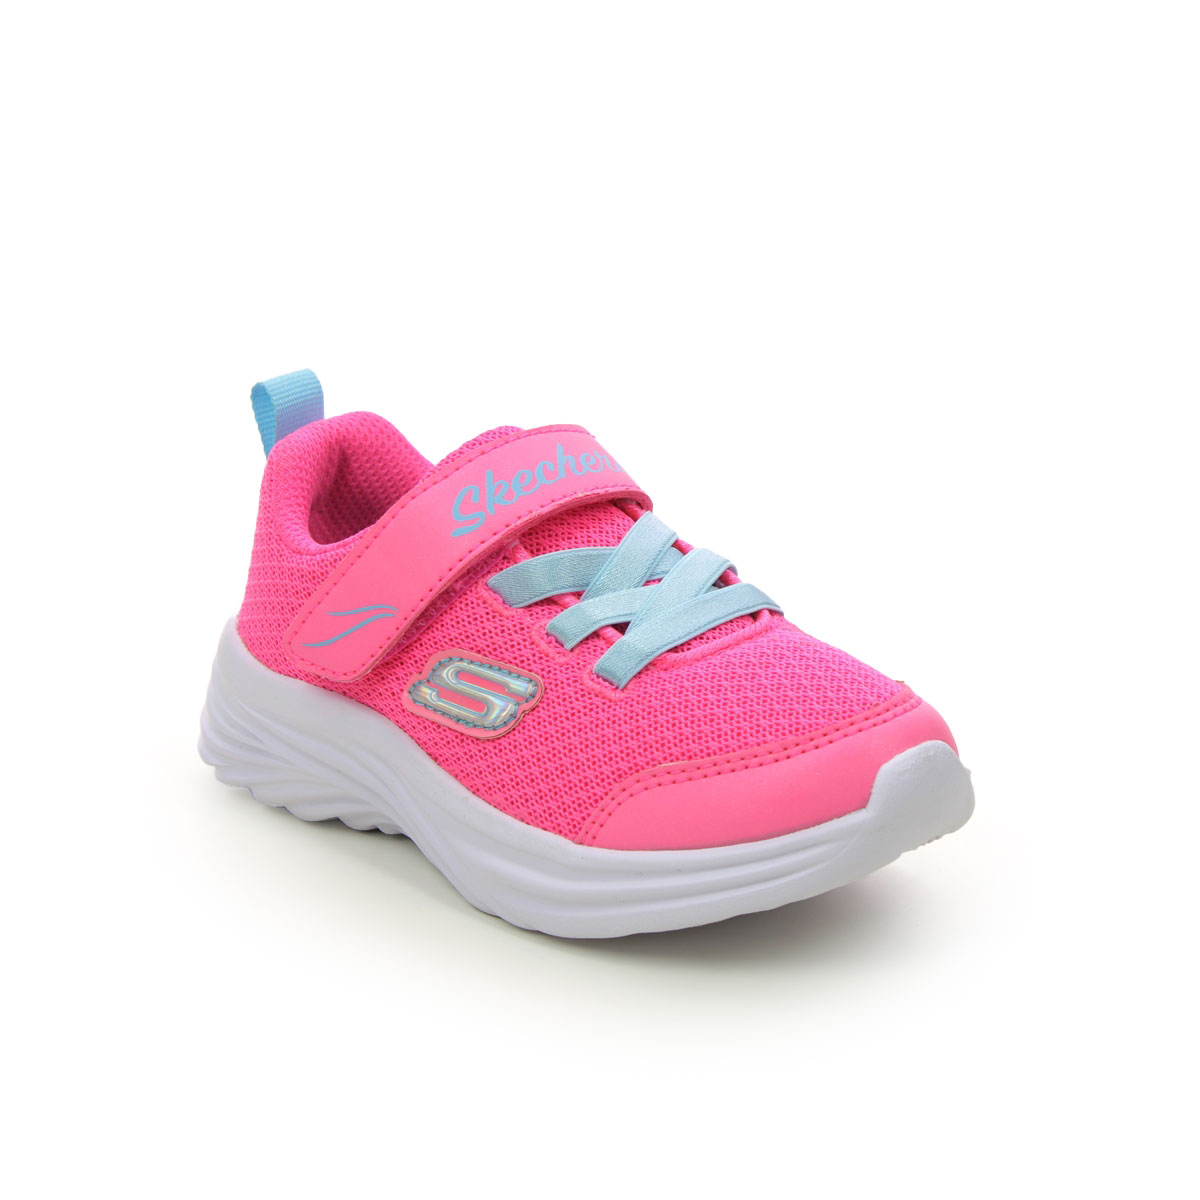 Skechers Dreamy Dancer Infant Pink Turquoise Kids Girls Trainers 302450N In Size 26 In Plain Pink Turquoise